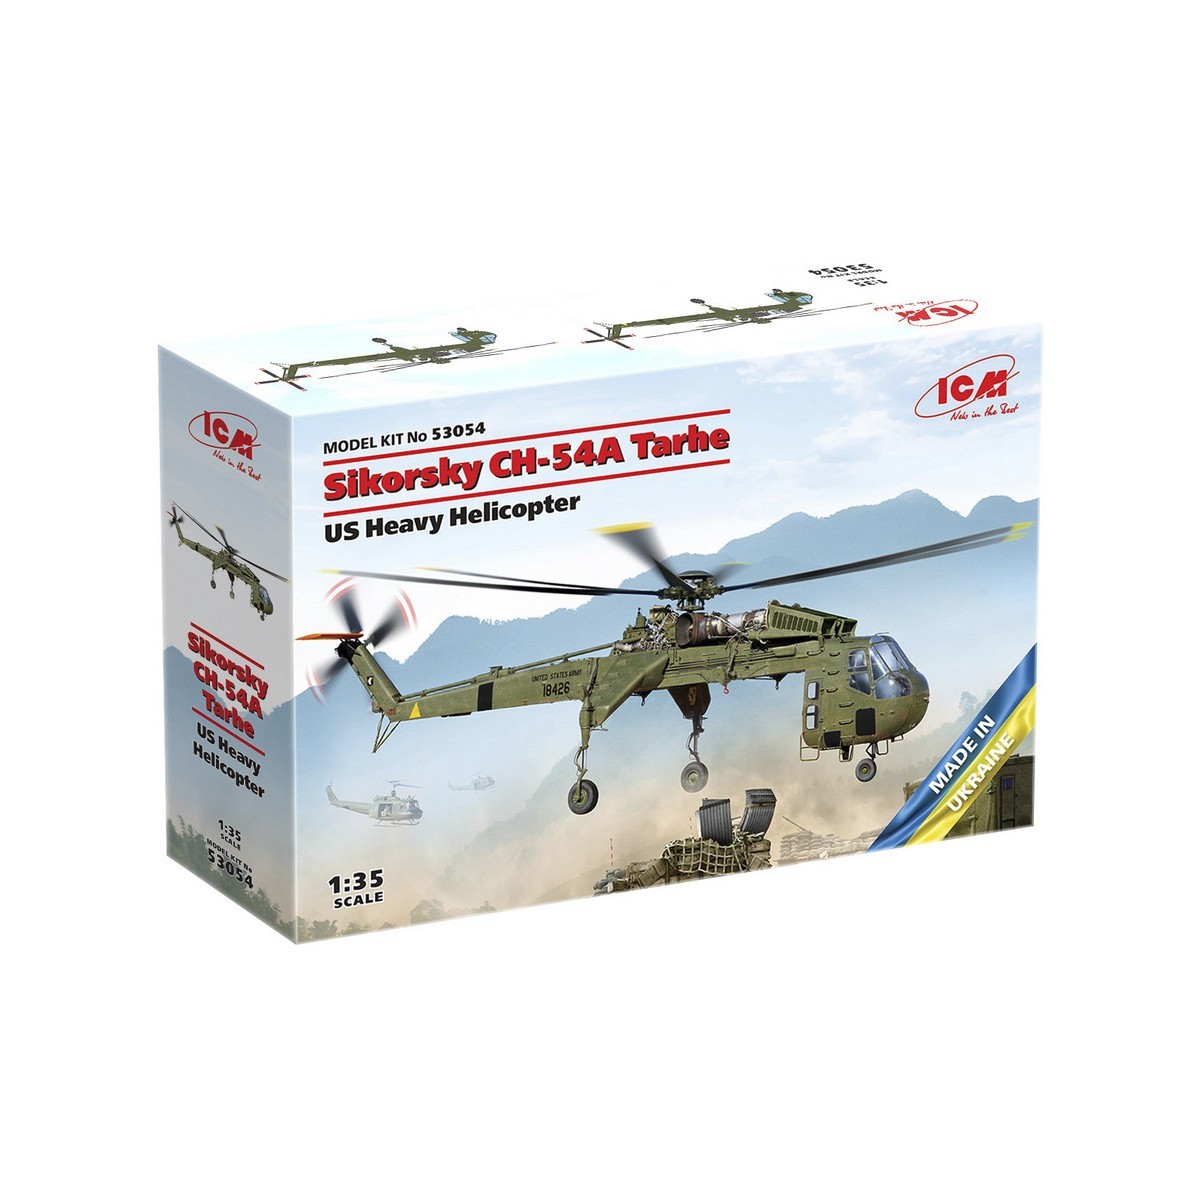 53054 - Sikorsky CH-54A Tarhe, US heavy helicopter - 1:35